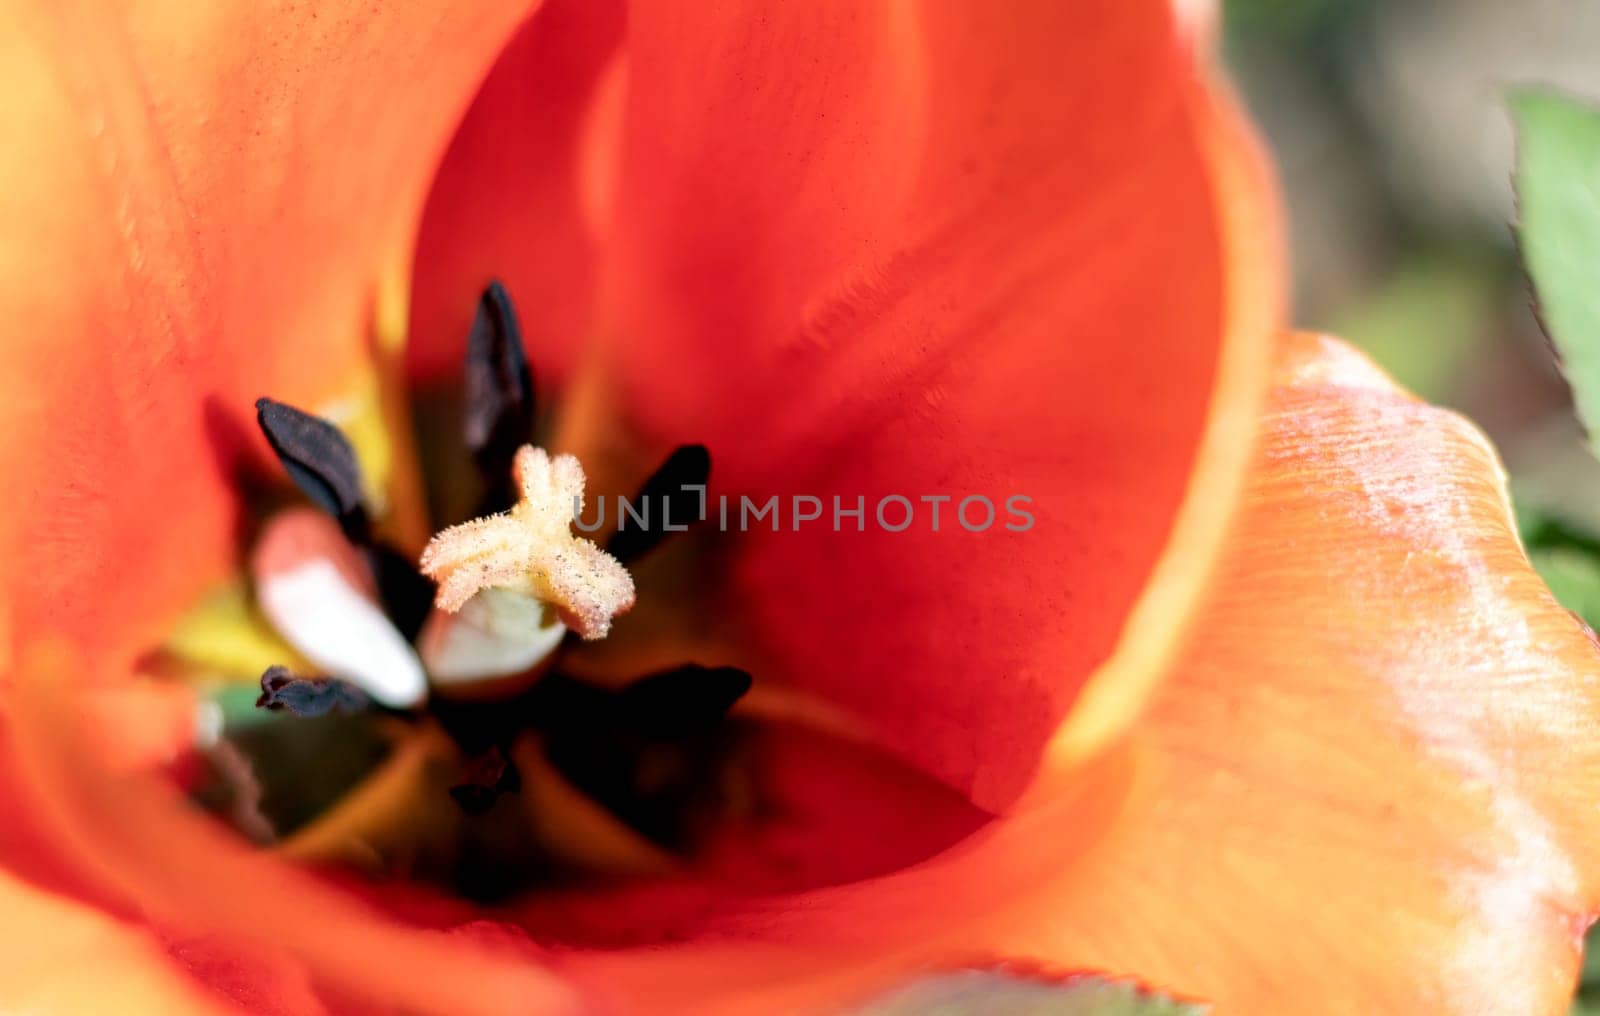 Inside a red tulip with a yellow center, petals and pollen. Close-up of the inside of a red tulip. Floral background. Nature. Selective shallow focus. Macro